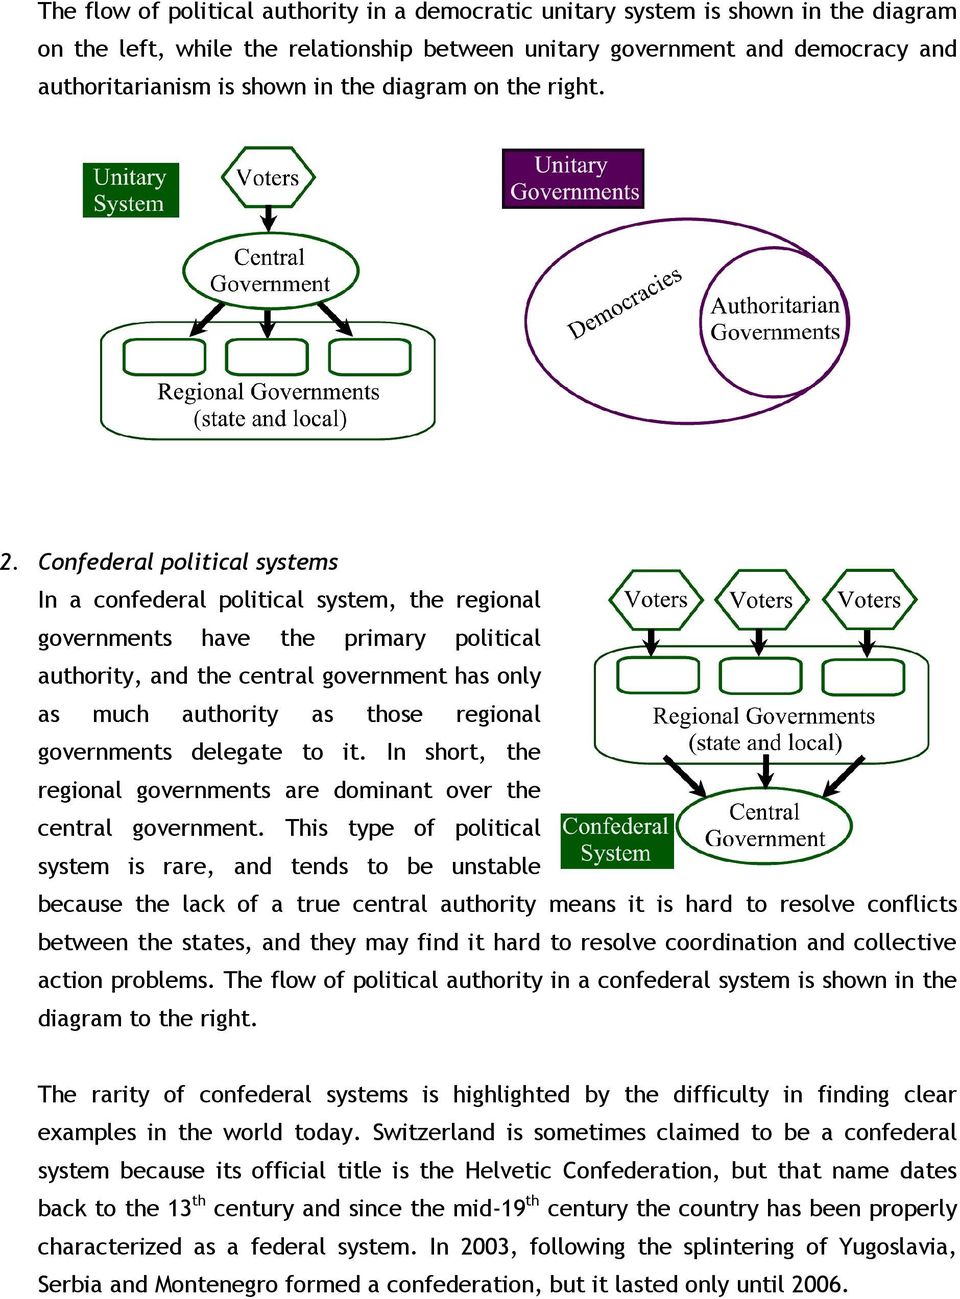 Confederal political systems In a confederal political system, the regional governments have the primary political authority, and the central government has only as much authority as those regional